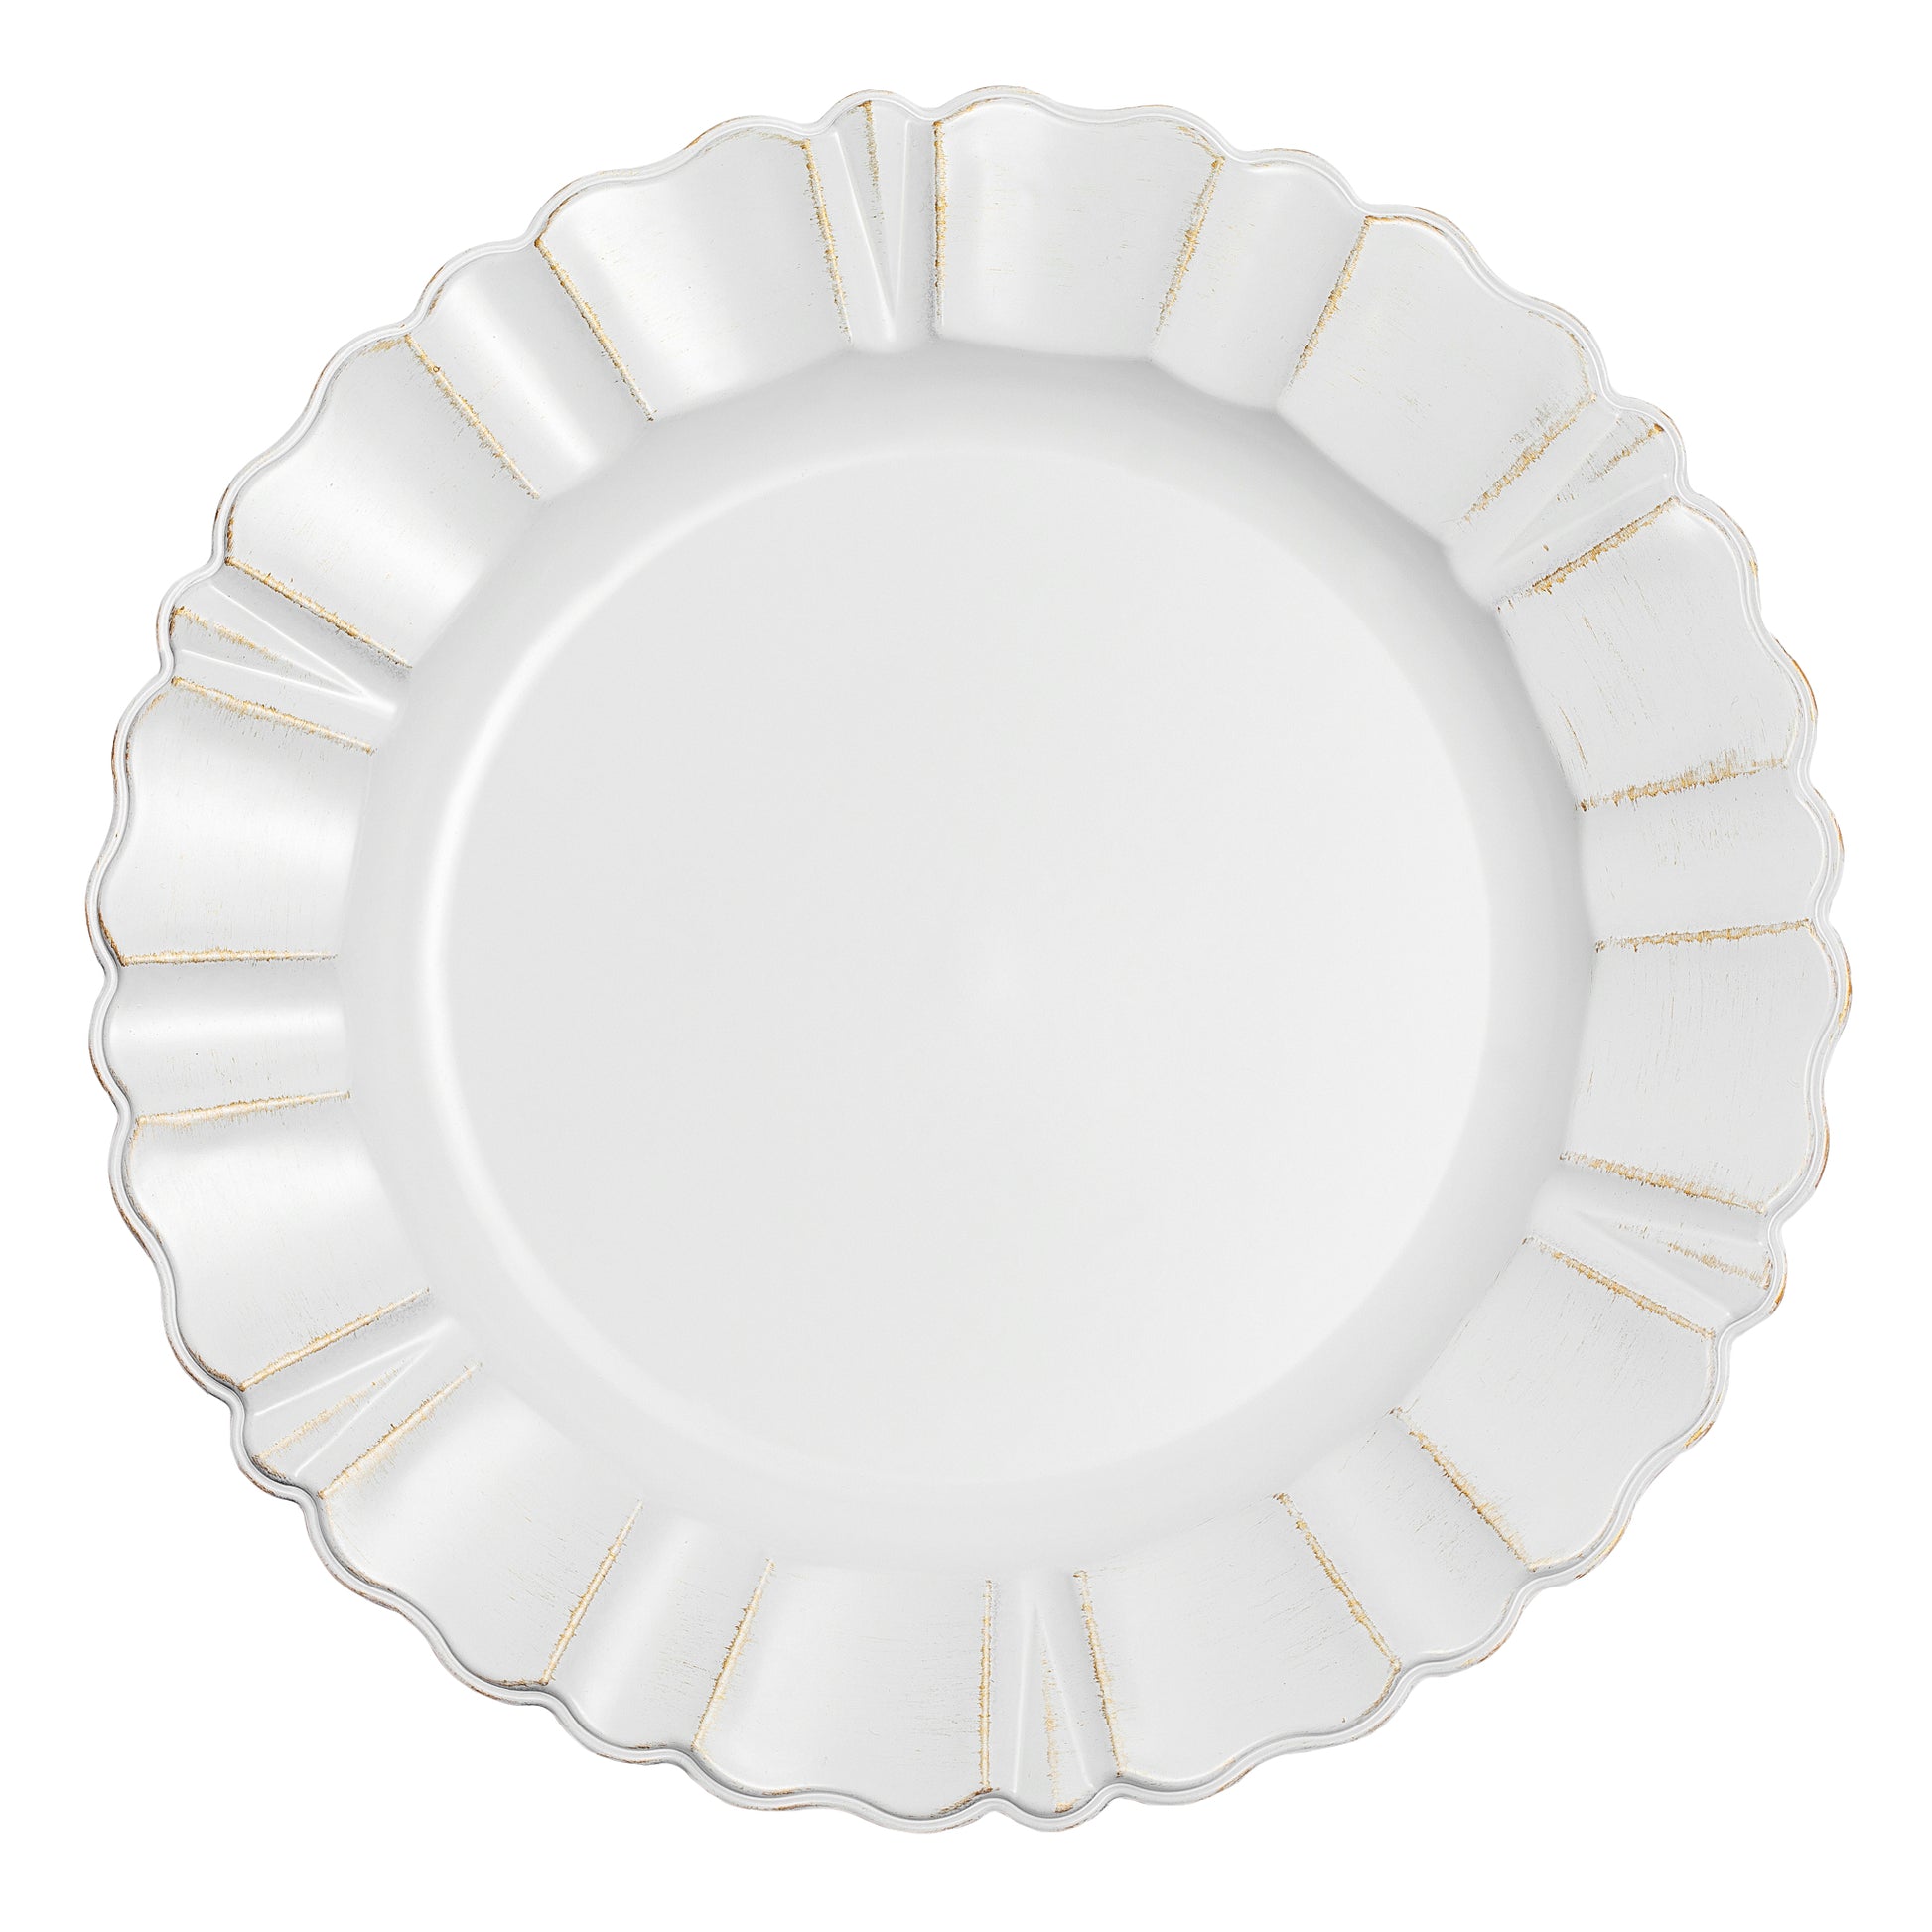 Waved Scalloped Acrylic 13" Charger Plate - Gold & White - CV Linens